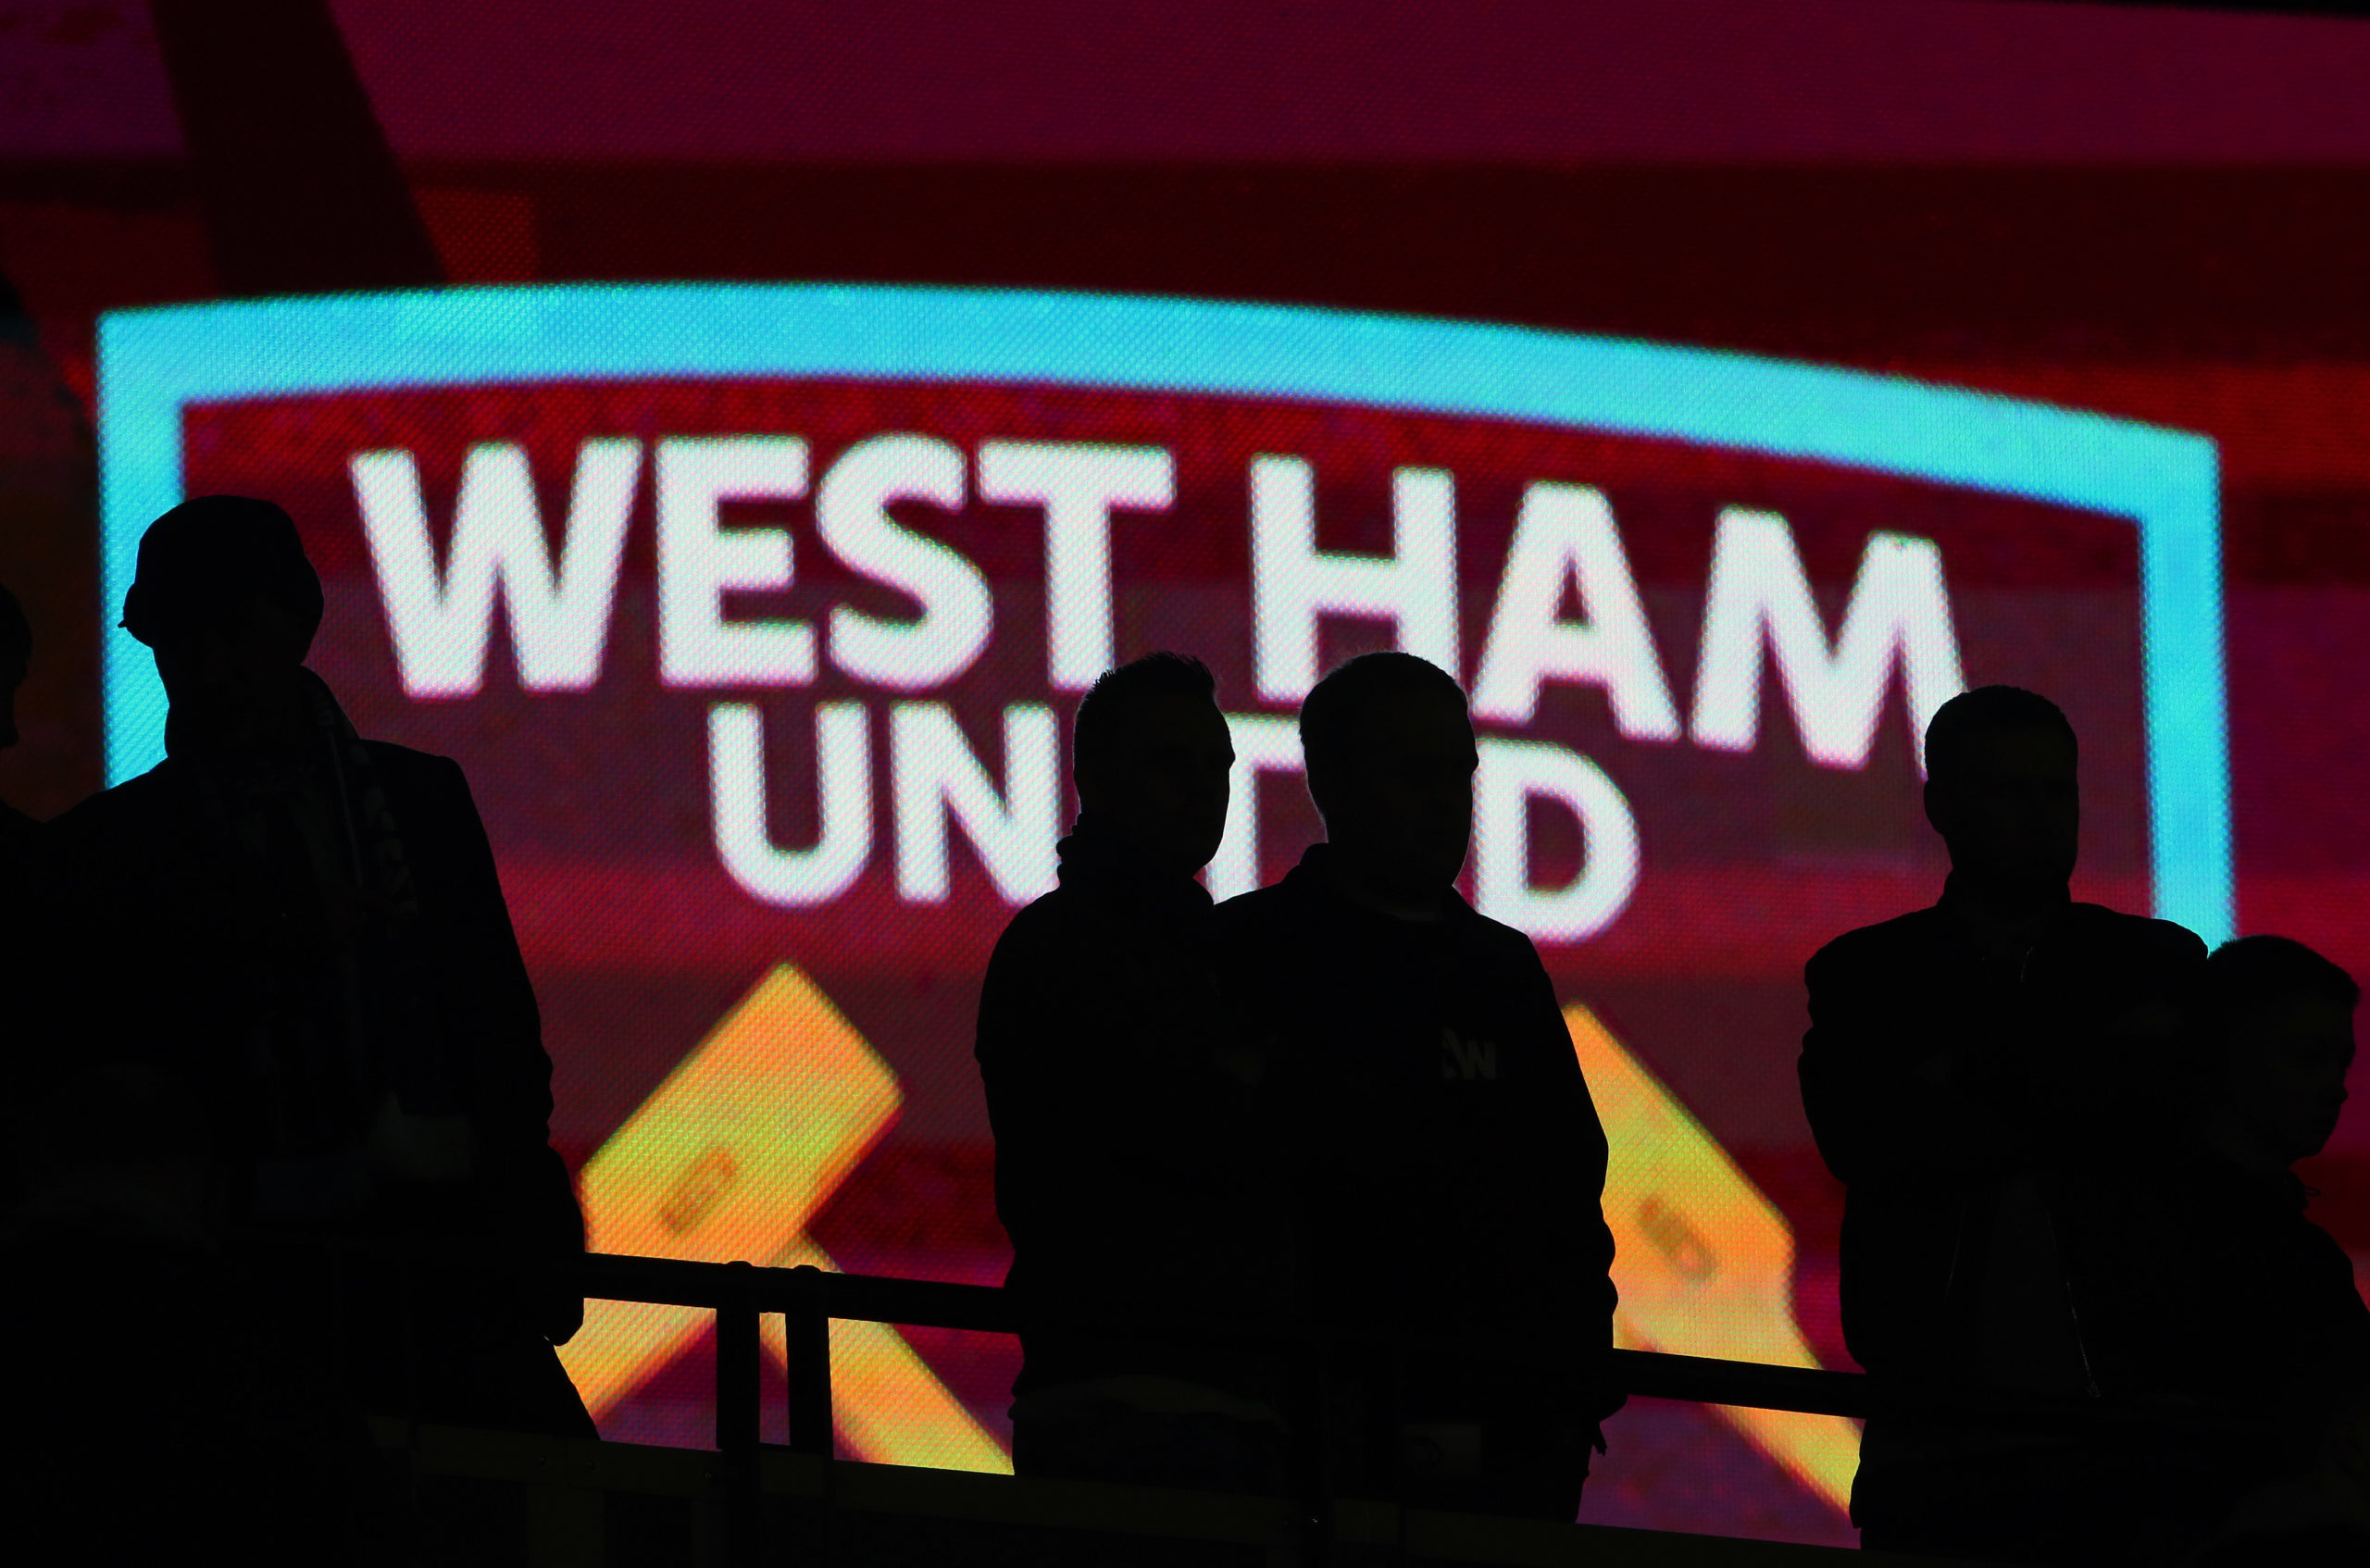 Insider claims West Ham have made a big decision over £12m transfer deal which could become clear soon